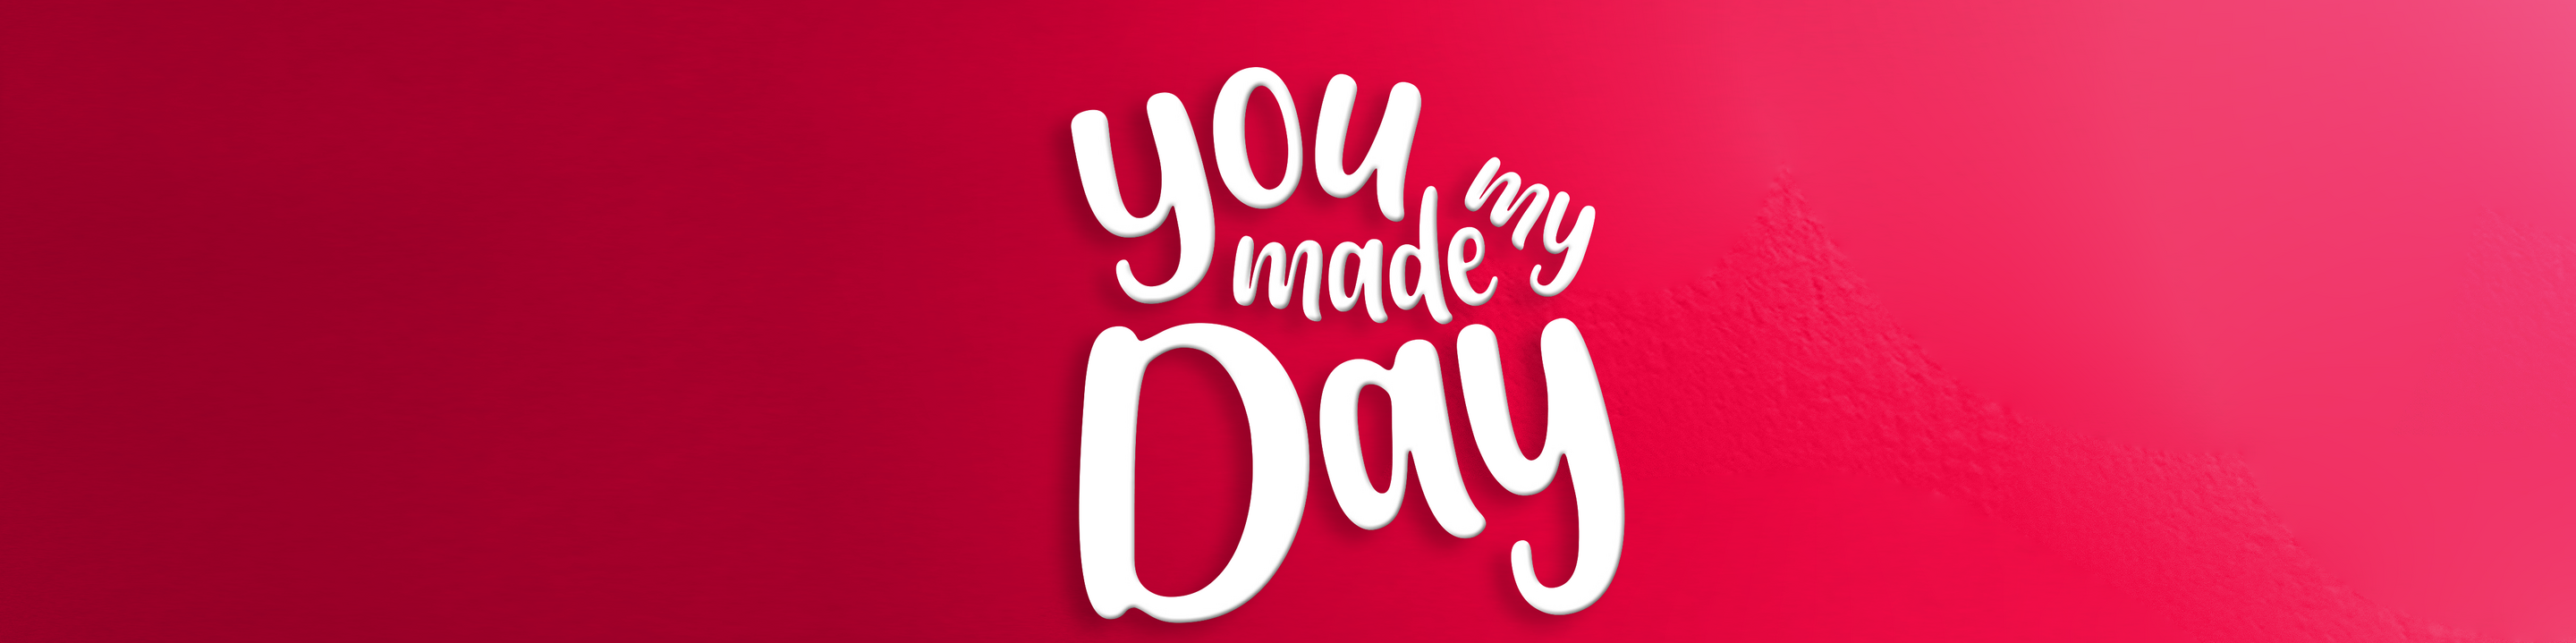 "You made my day" lettering on a red background